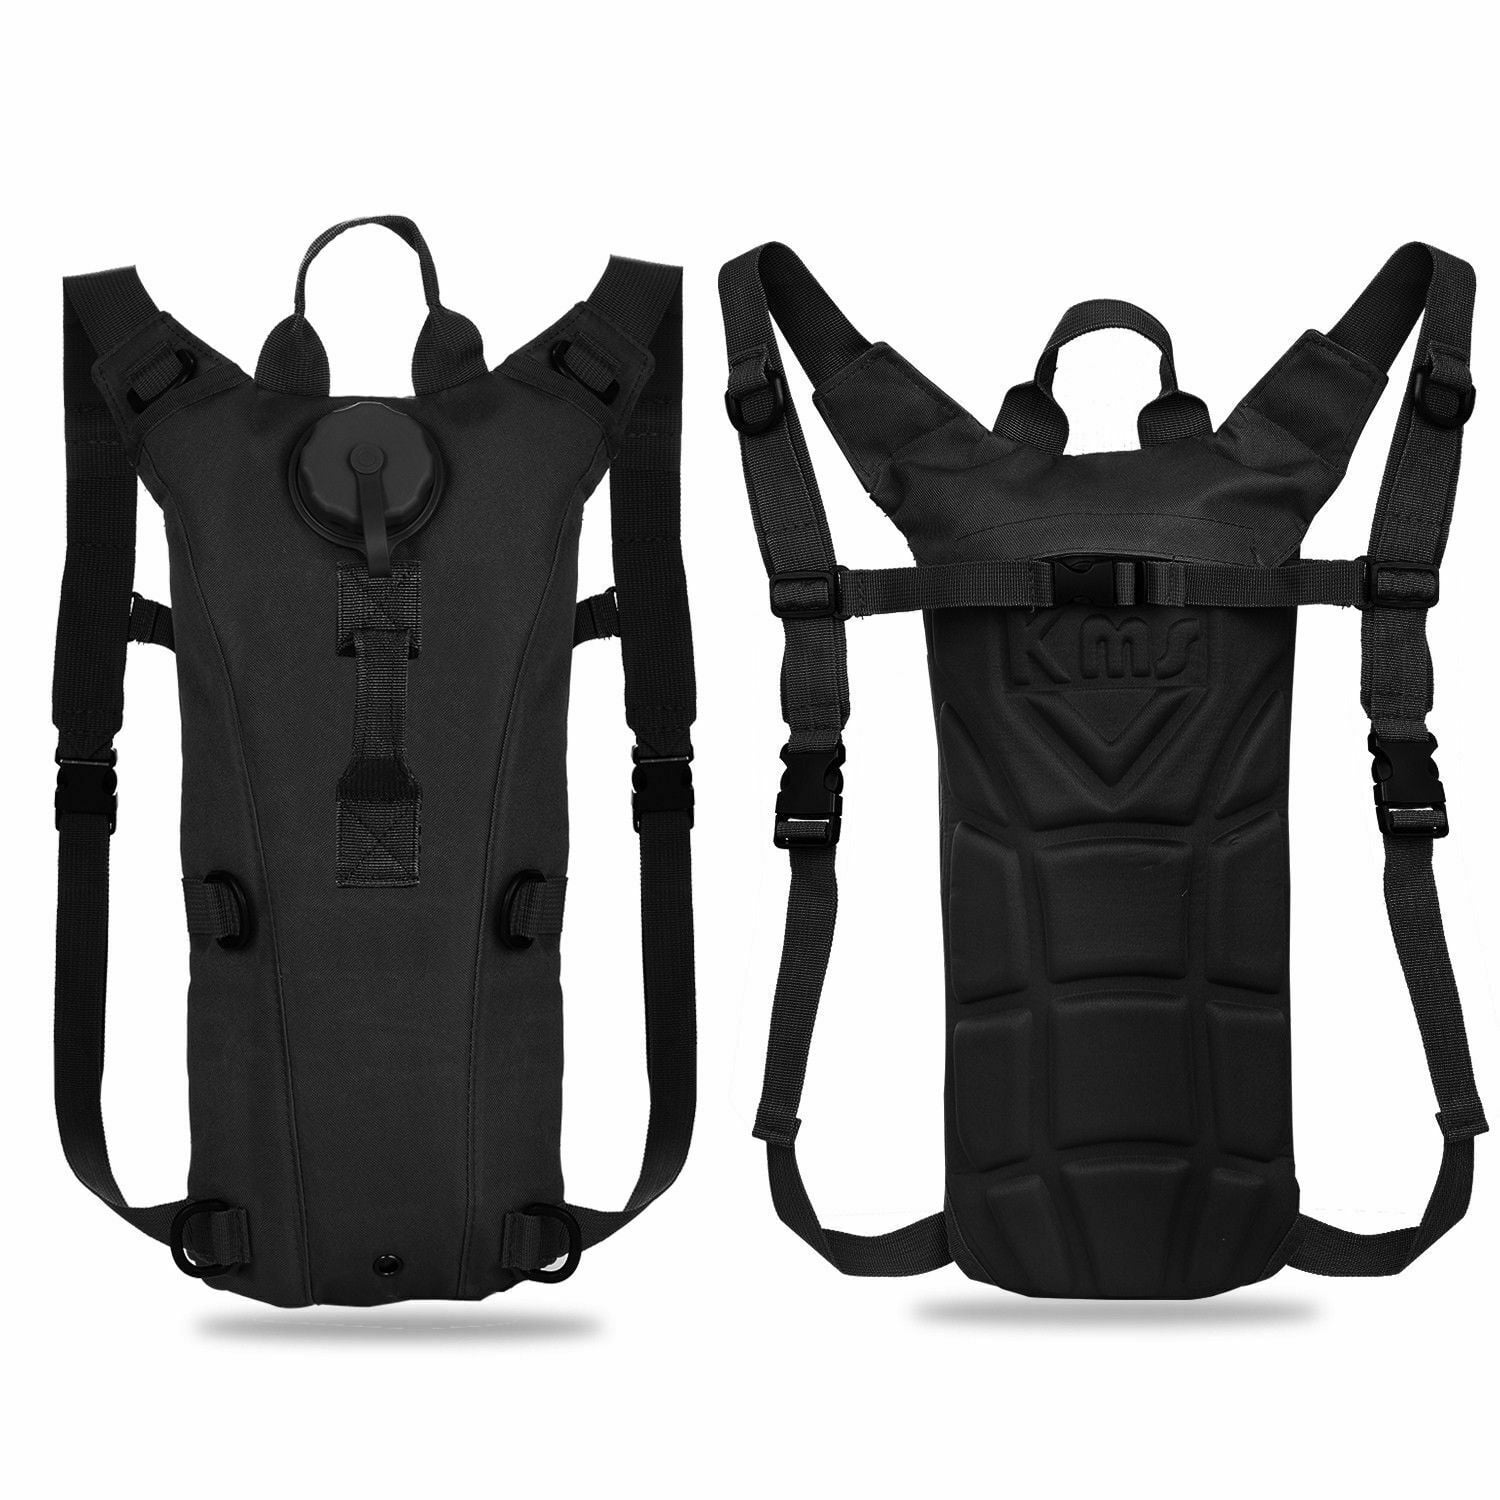 ARMY PATROL HYDRATION BACKPACK WATER BLADDER MOLLE WEBBING AIRSOFT HIKING BLACK 